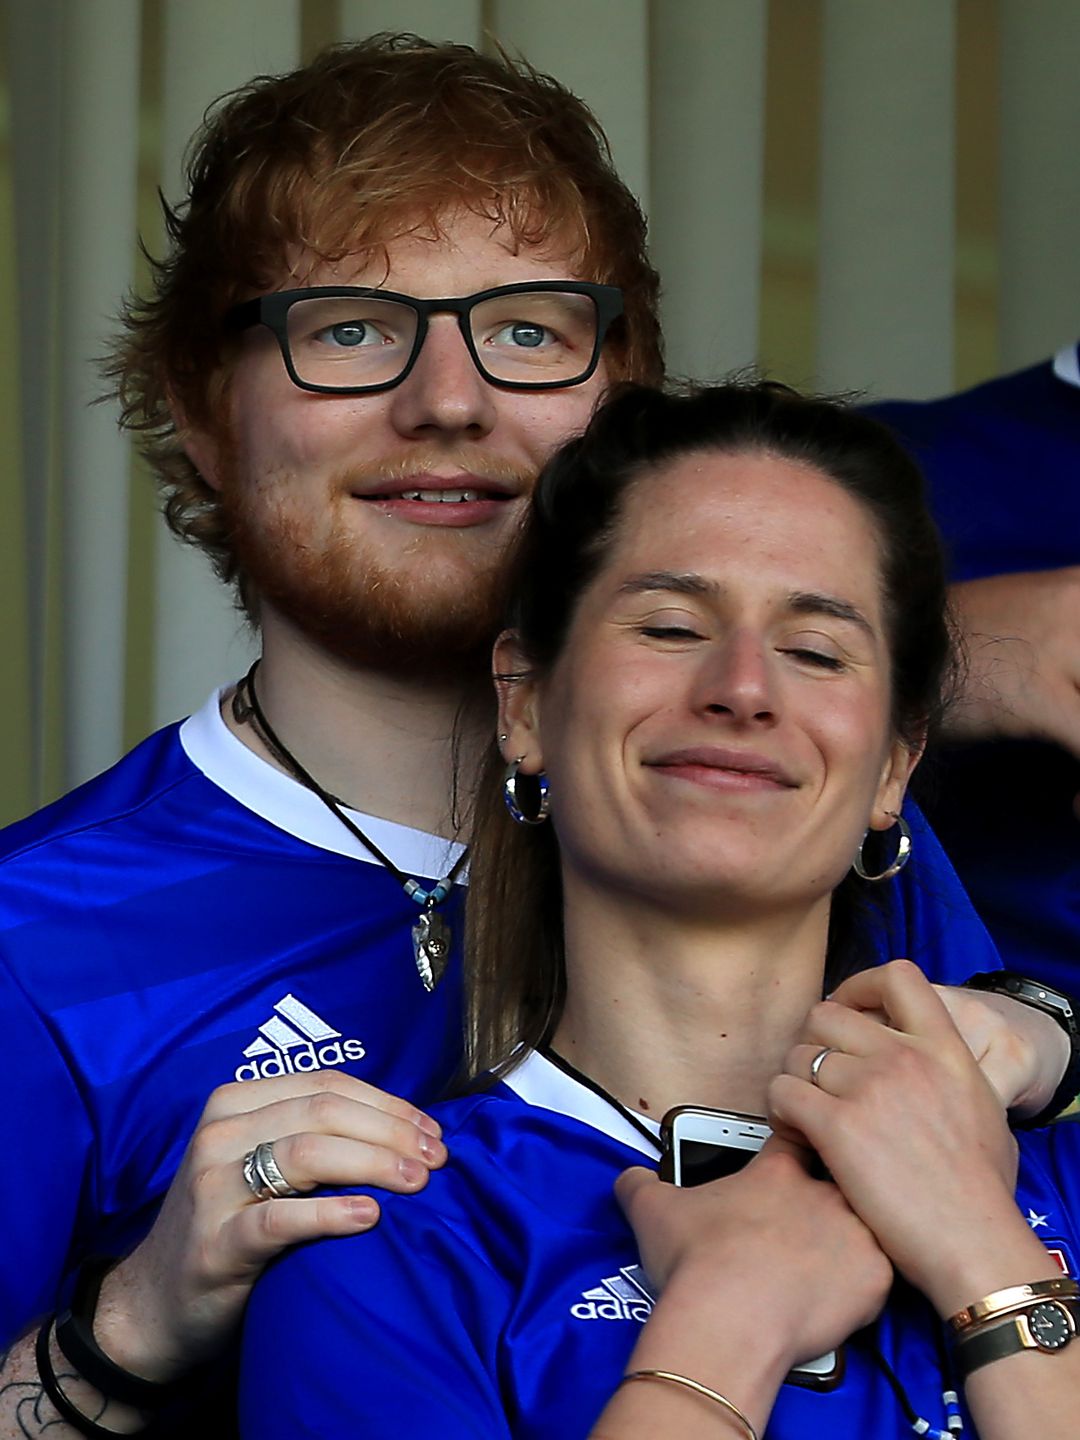 Ed Sheeran and Cherry Seaborn at a football game, she is resting her head on his shoulder